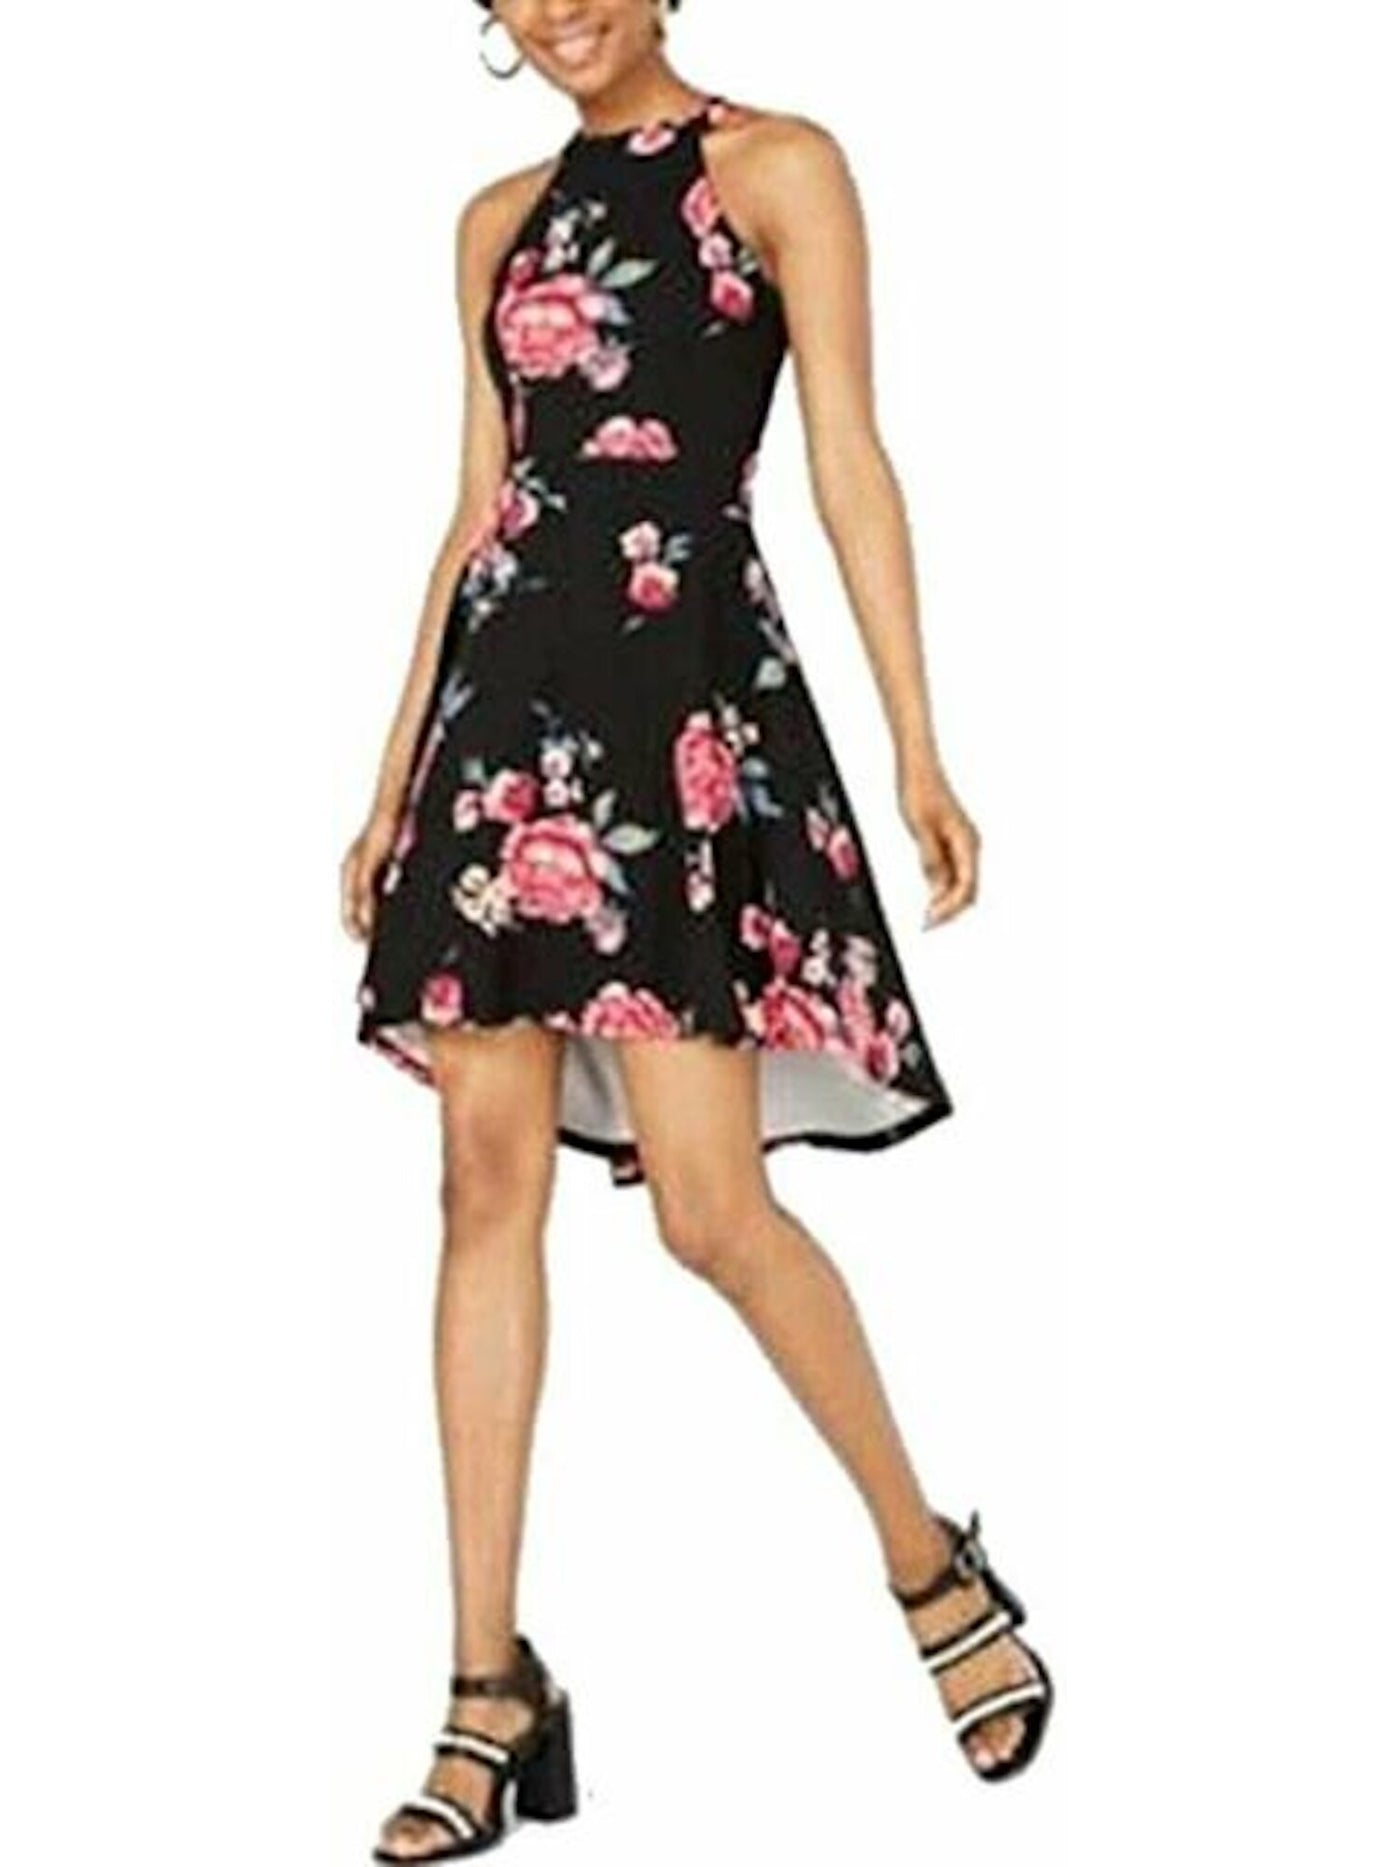 CRAVE FAME Womens Black Zippered Floral Sleeveless Halter Party Hi-Lo Dress Juniors 2XS